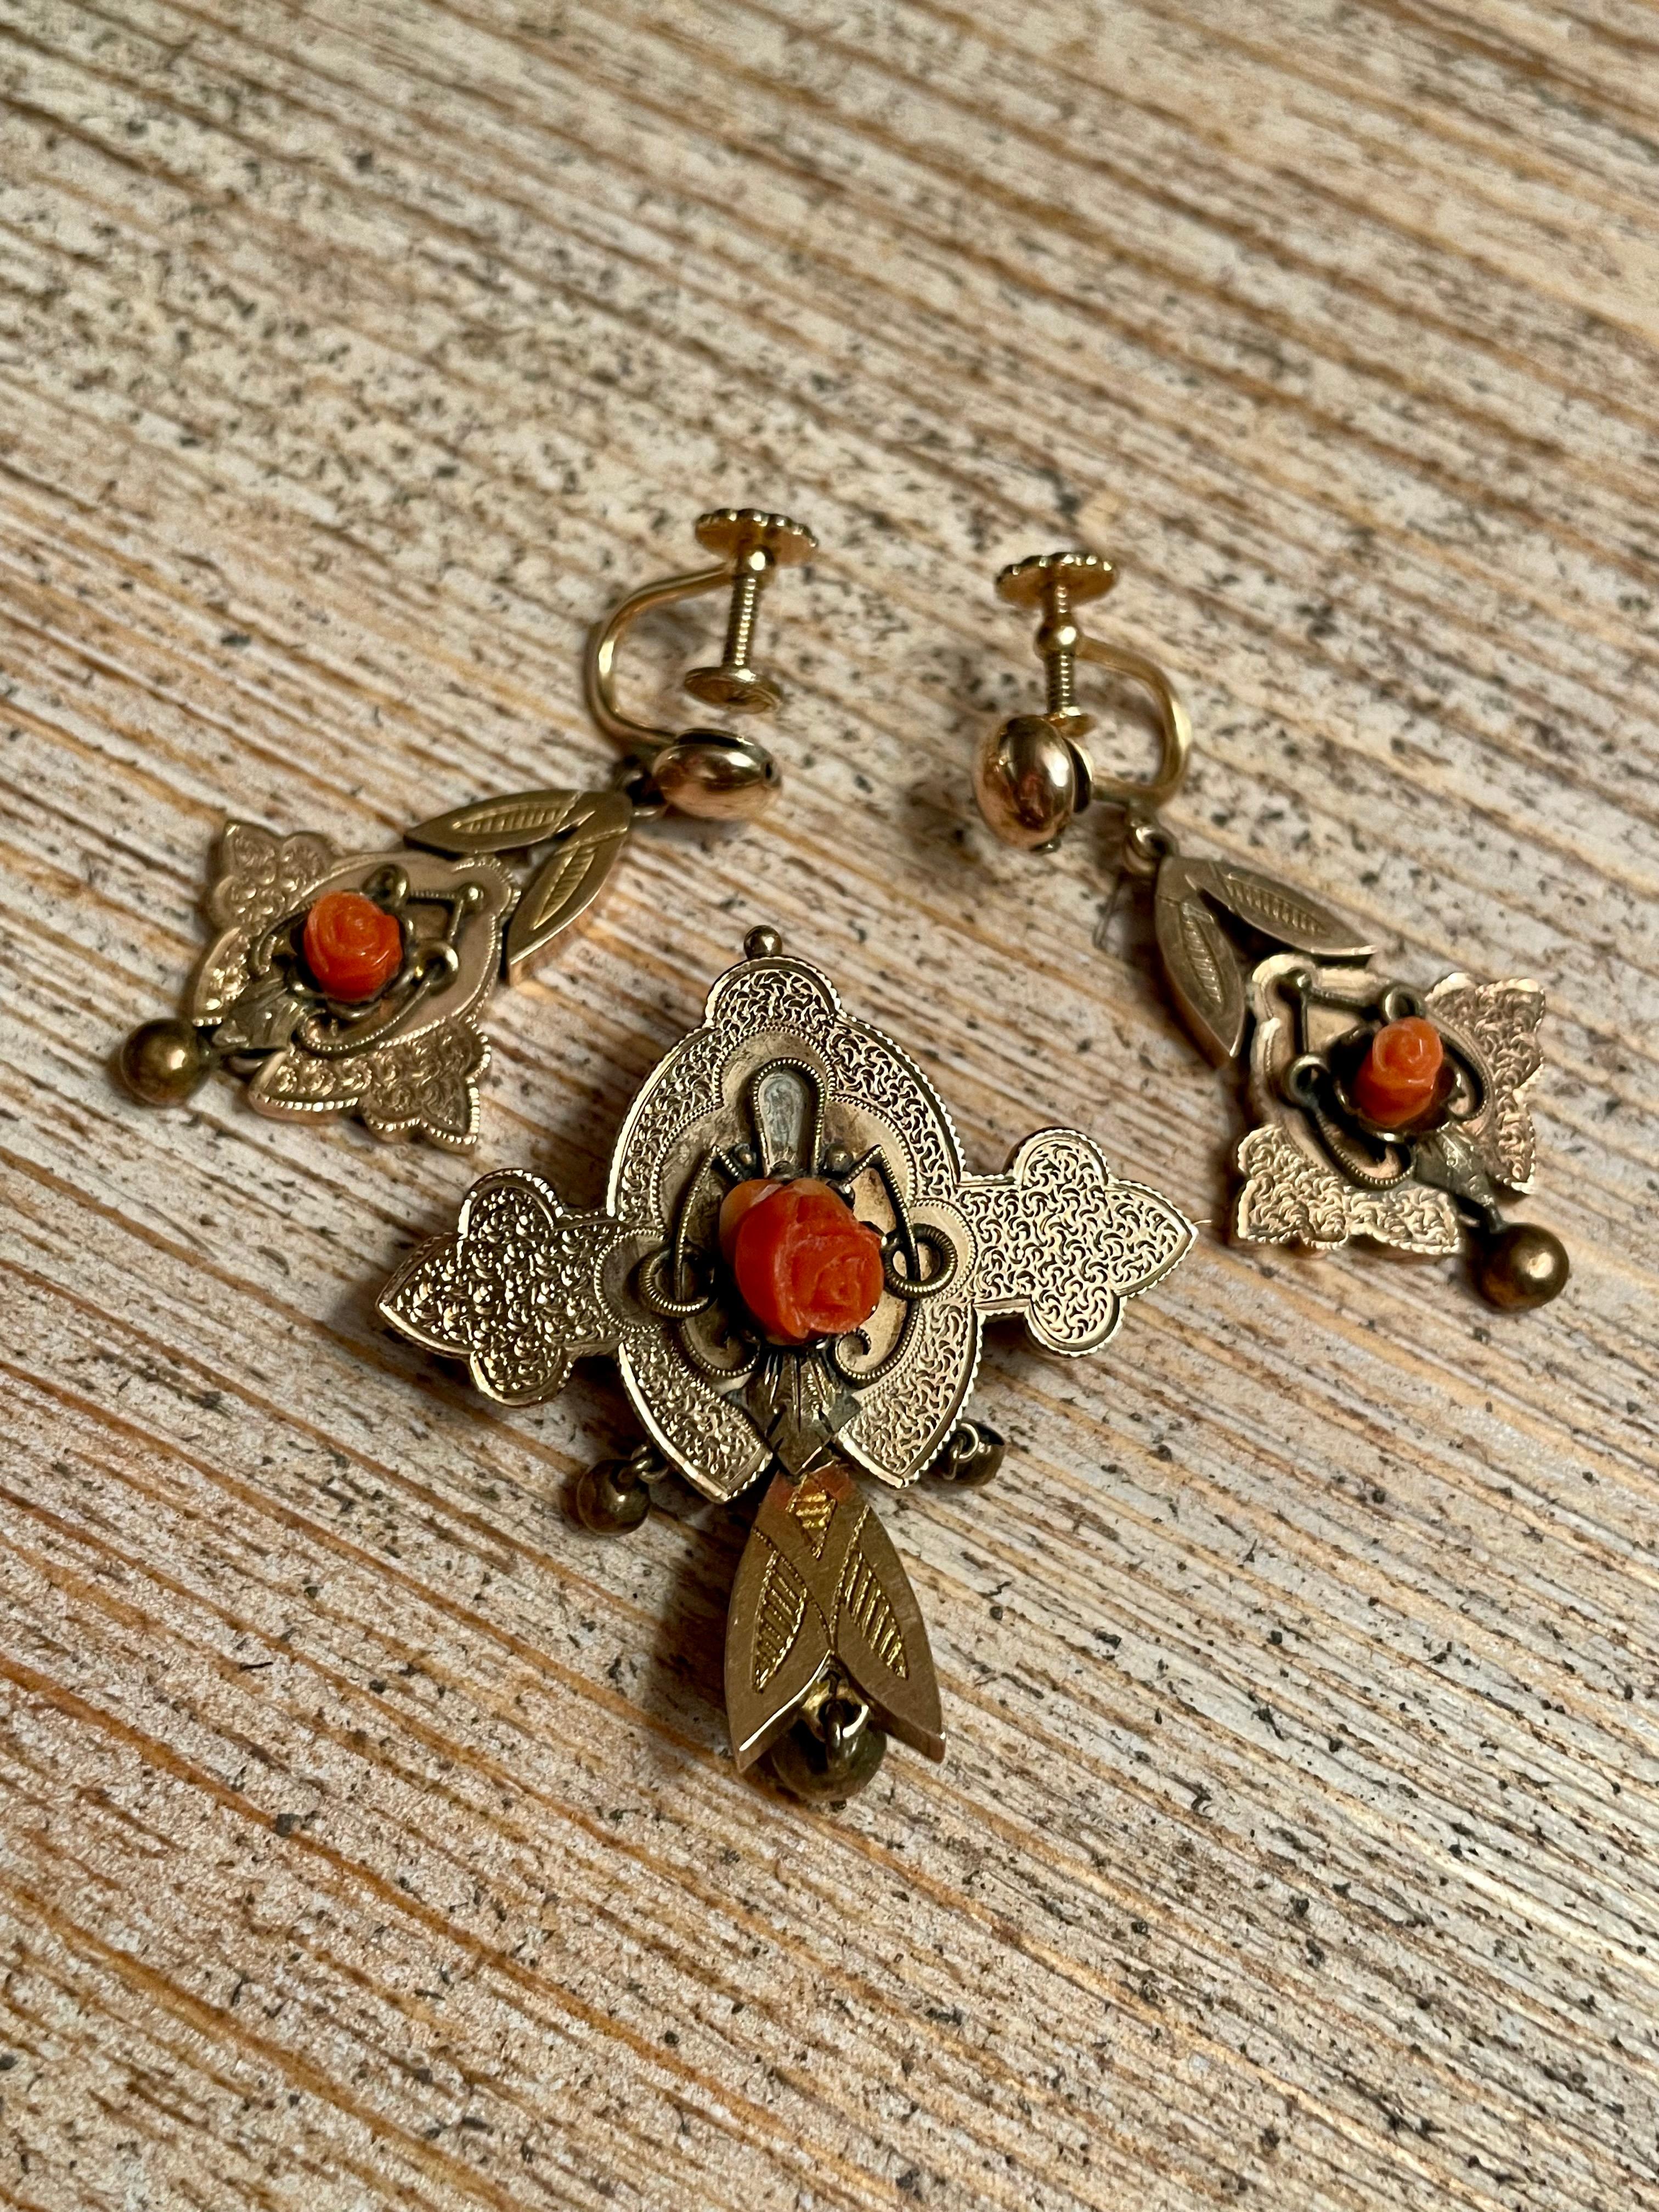 This lovely Gold-filled Victorian set consists of  matching screw back earrings and a brooch which can also be worn as a pendant.  Each piece features a floral design of Coral carved.  

Stamp:  1/20 12k GF

Brooch/Pendant dimensions: approximately